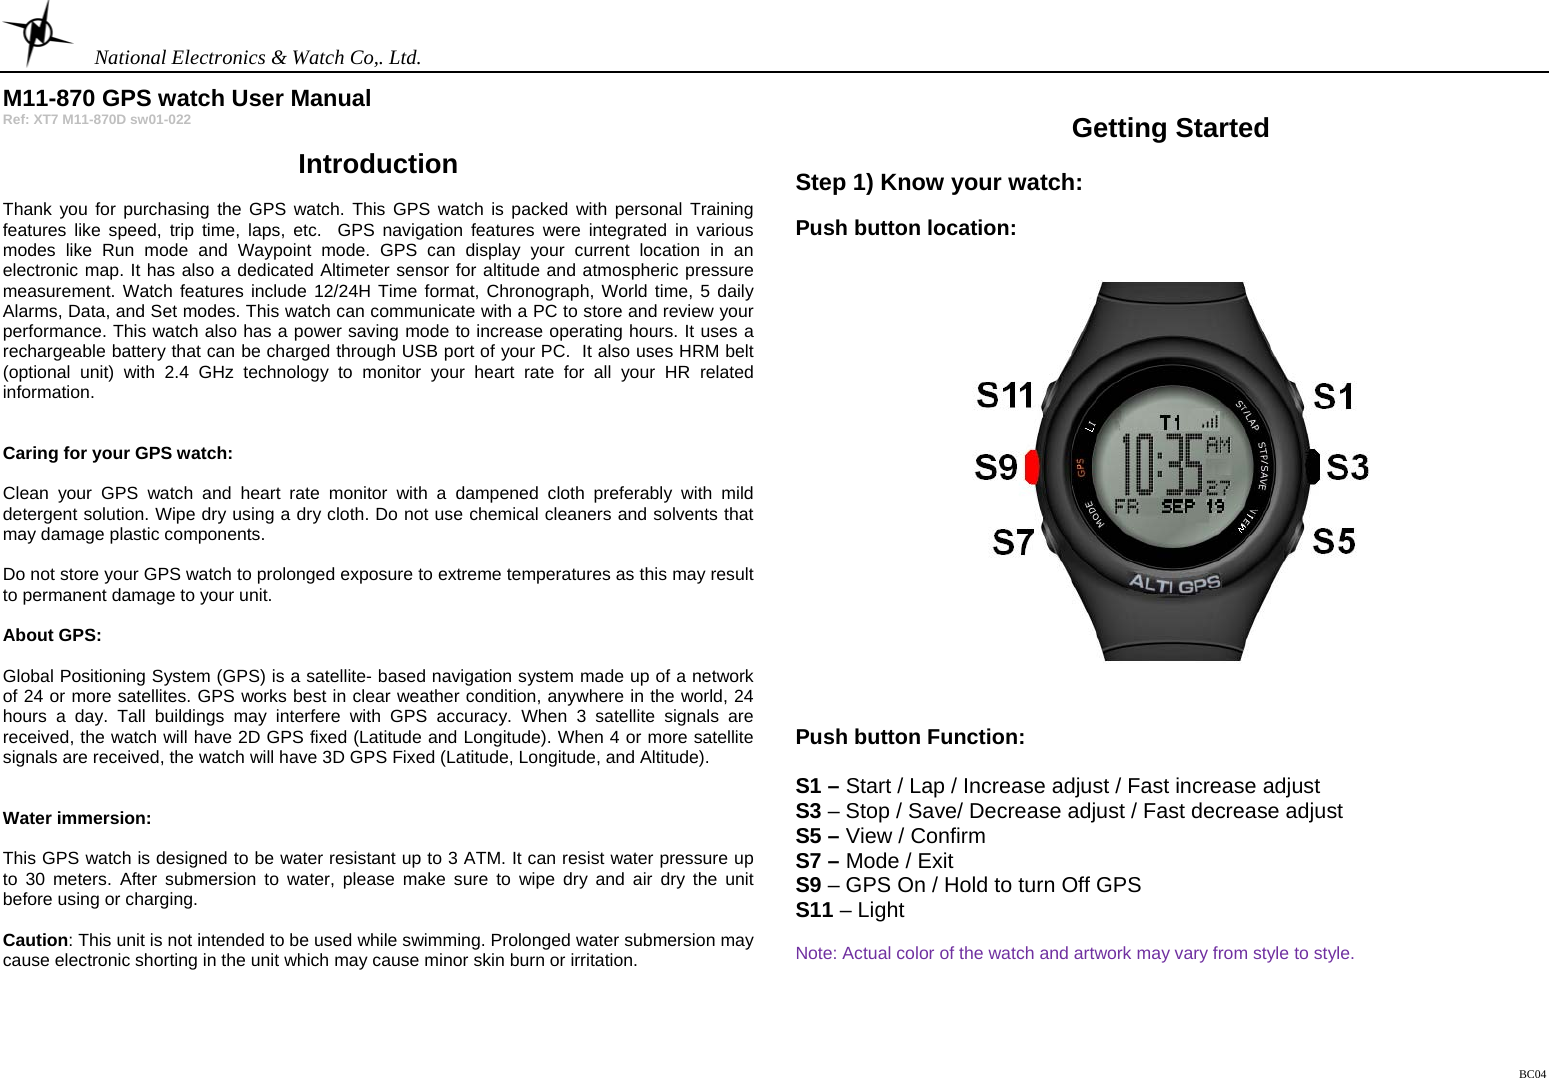    National Electronics &amp; Watch Co,. Ltd. BC04  M11-870 GPS watch User Manual Ref: XT7 M11-870D sw01-022  Introduction  Thank you for purchasing the GPS watch. This GPS watch is packed with personal Training features like speed, trip time, laps, etc.  GPS navigation features were integrated in various modes like Run mode and Waypoint mode. GPS can display your current location in an electronic map. It has also a dedicated Altimeter sensor for altitude and atmospheric pressure measurement. Watch features include 12/24H Time format, Chronograph, World time, 5 daily Alarms, Data, and Set modes. This watch can communicate with a PC to store and review your performance. This watch also has a power saving mode to increase operating hours. It uses a rechargeable battery that can be charged through USB port of your PC.  It also uses HRM belt (optional unit) with 2.4 GHz technology to monitor your heart rate for all your HR related information.   Caring for your GPS watch:   Clean your GPS watch and heart rate monitor with a dampened cloth preferably with mild detergent solution. Wipe dry using a dry cloth. Do not use chemical cleaners and solvents that may damage plastic components.  Do not store your GPS watch to prolonged exposure to extreme temperatures as this may result to permanent damage to your unit.  About GPS:  Global Positioning System (GPS) is a satellite- based navigation system made up of a network of 24 or more satellites. GPS works best in clear weather condition, anywhere in the world, 24 hours a day. Tall buildings may interfere with GPS accuracy. When 3 satellite signals are received, the watch will have 2D GPS fixed (Latitude and Longitude). When 4 or more satellite signals are received, the watch will have 3D GPS Fixed (Latitude, Longitude, and Altitude).    Water immersion:  This GPS watch is designed to be water resistant up to 3 ATM. It can resist water pressure up to 30 meters. After submersion to water, please make sure to wipe dry and air dry the unit before using or charging.  Caution: This unit is not intended to be used while swimming. Prolonged water submersion may cause electronic shorting in the unit which may cause minor skin burn or irritation.     Getting Started  Step 1) Know your watch:  Push button location:       Push button Function:  S1 – Start / Lap / Increase adjust / Fast increase adjust S3 – Stop / Save/ Decrease adjust / Fast decrease adjust S5 – View / Confirm S7 – Mode / Exit S9 – GPS On / Hold to turn Off GPS S11 – Light  Note: Actual color of the watch and artwork may vary from style to style.     